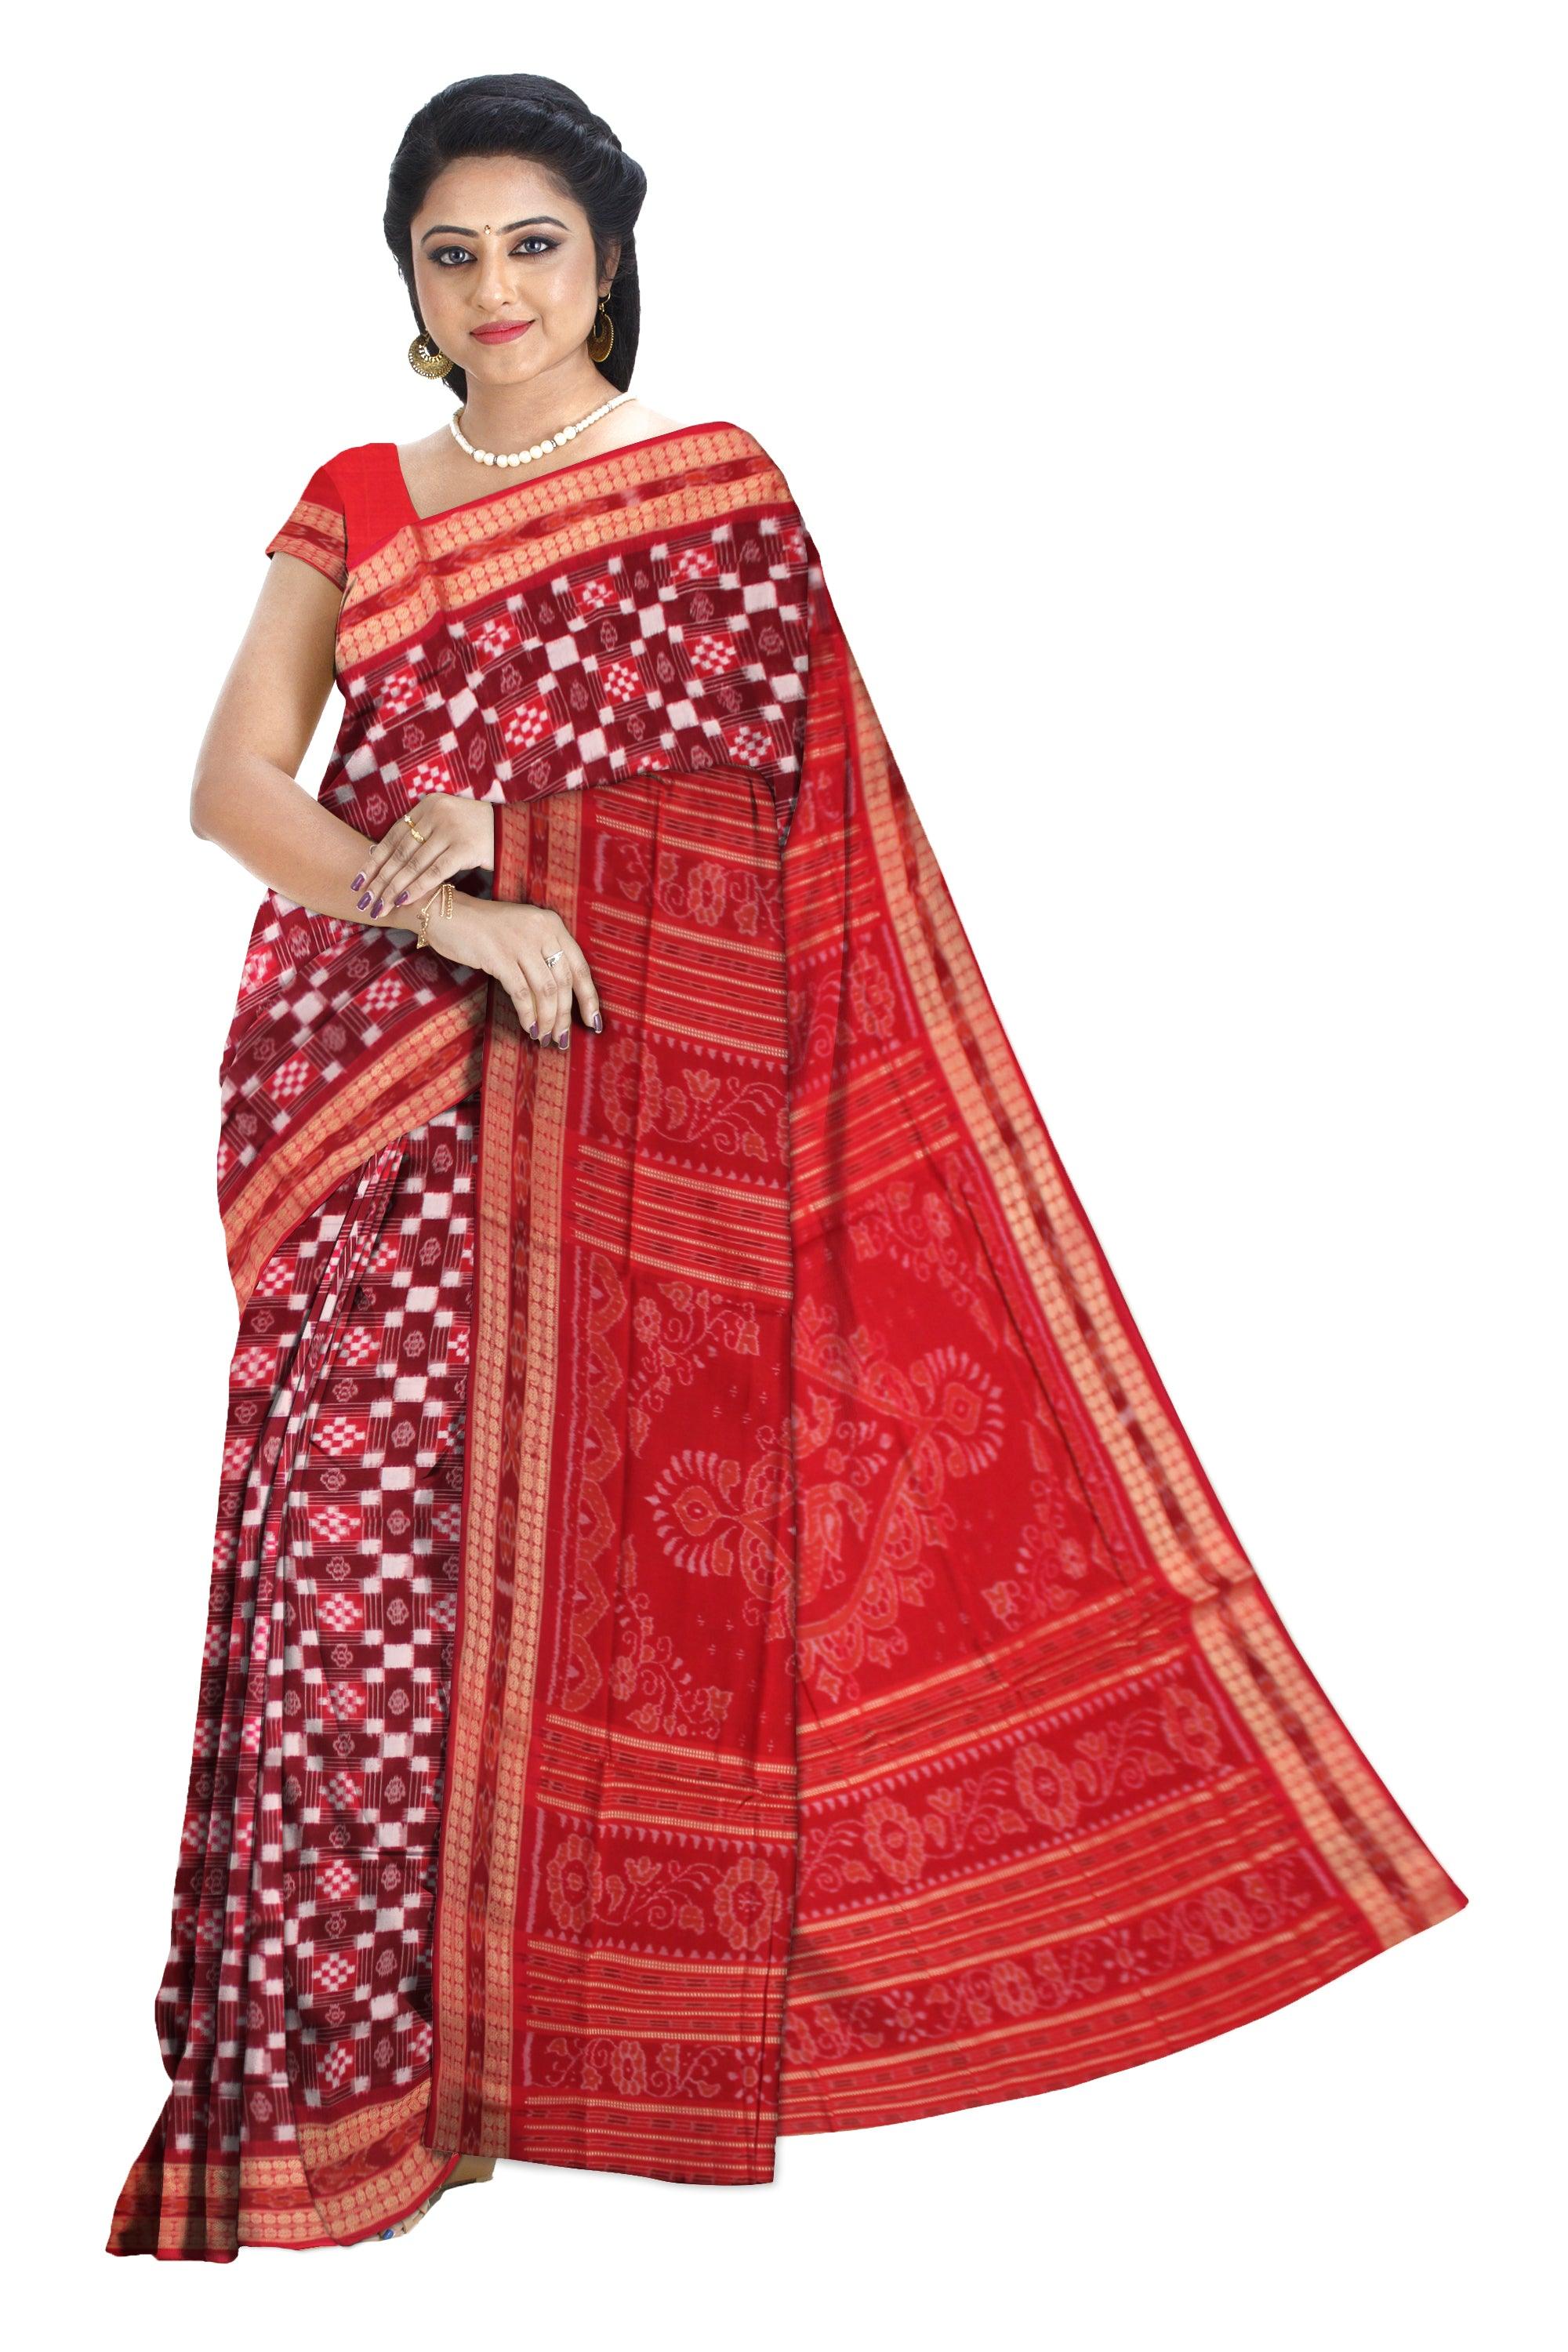 SONEPUR PASAPALI DESIGN COTTON SAREE IN RED AND MAROON COLOR, WITH BLOUSE PIECE. - Koshali Arts & Crafts Enterprise